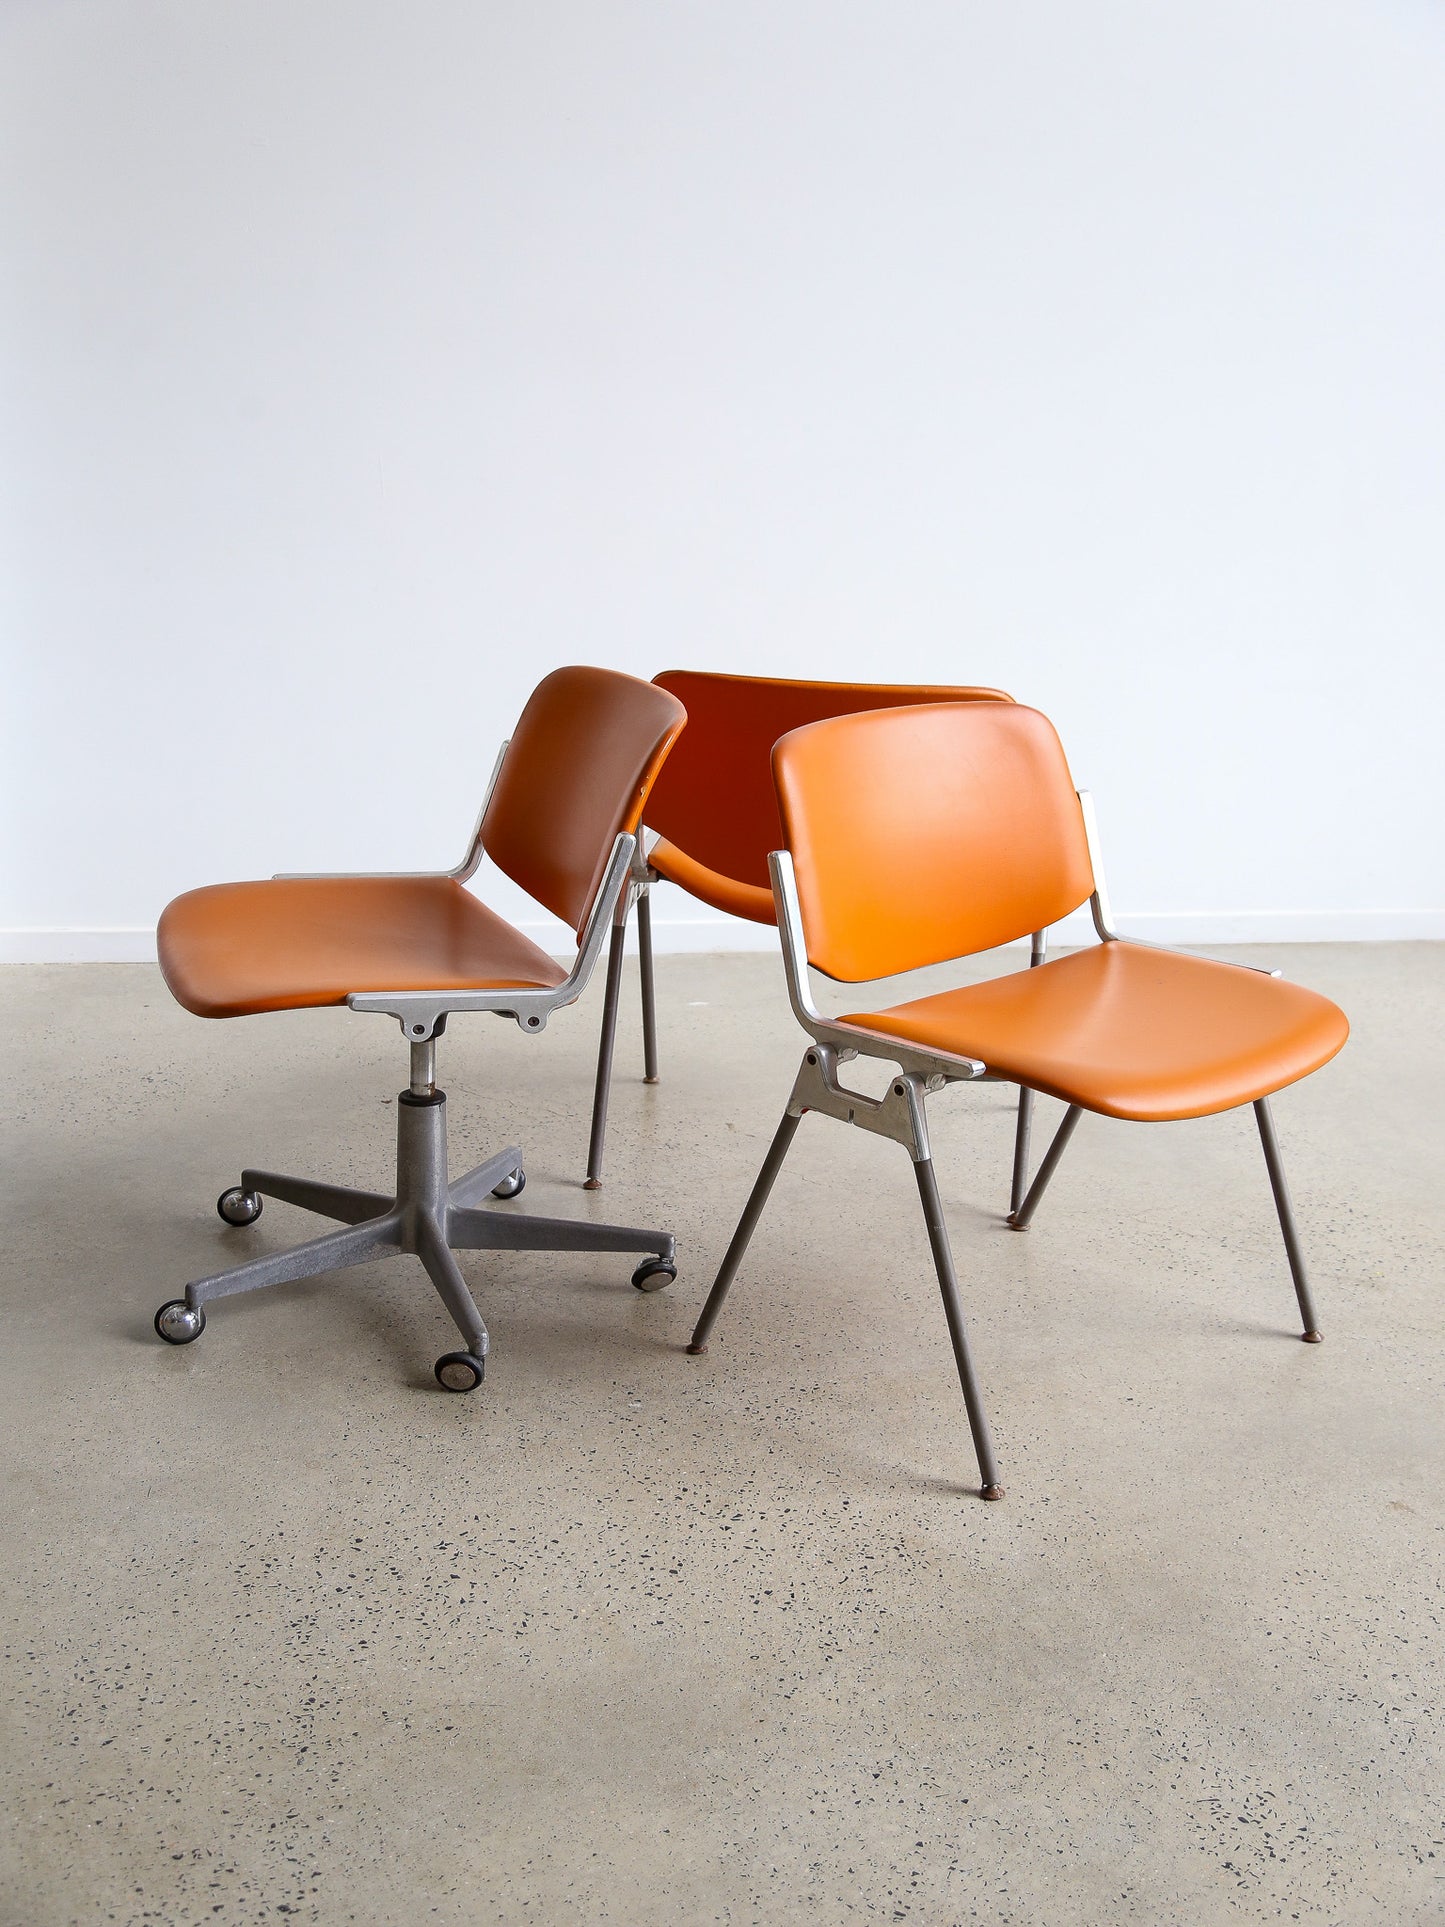 Set of Three DSC 106 Office chairs by Giancarlo Piretti for Castelli